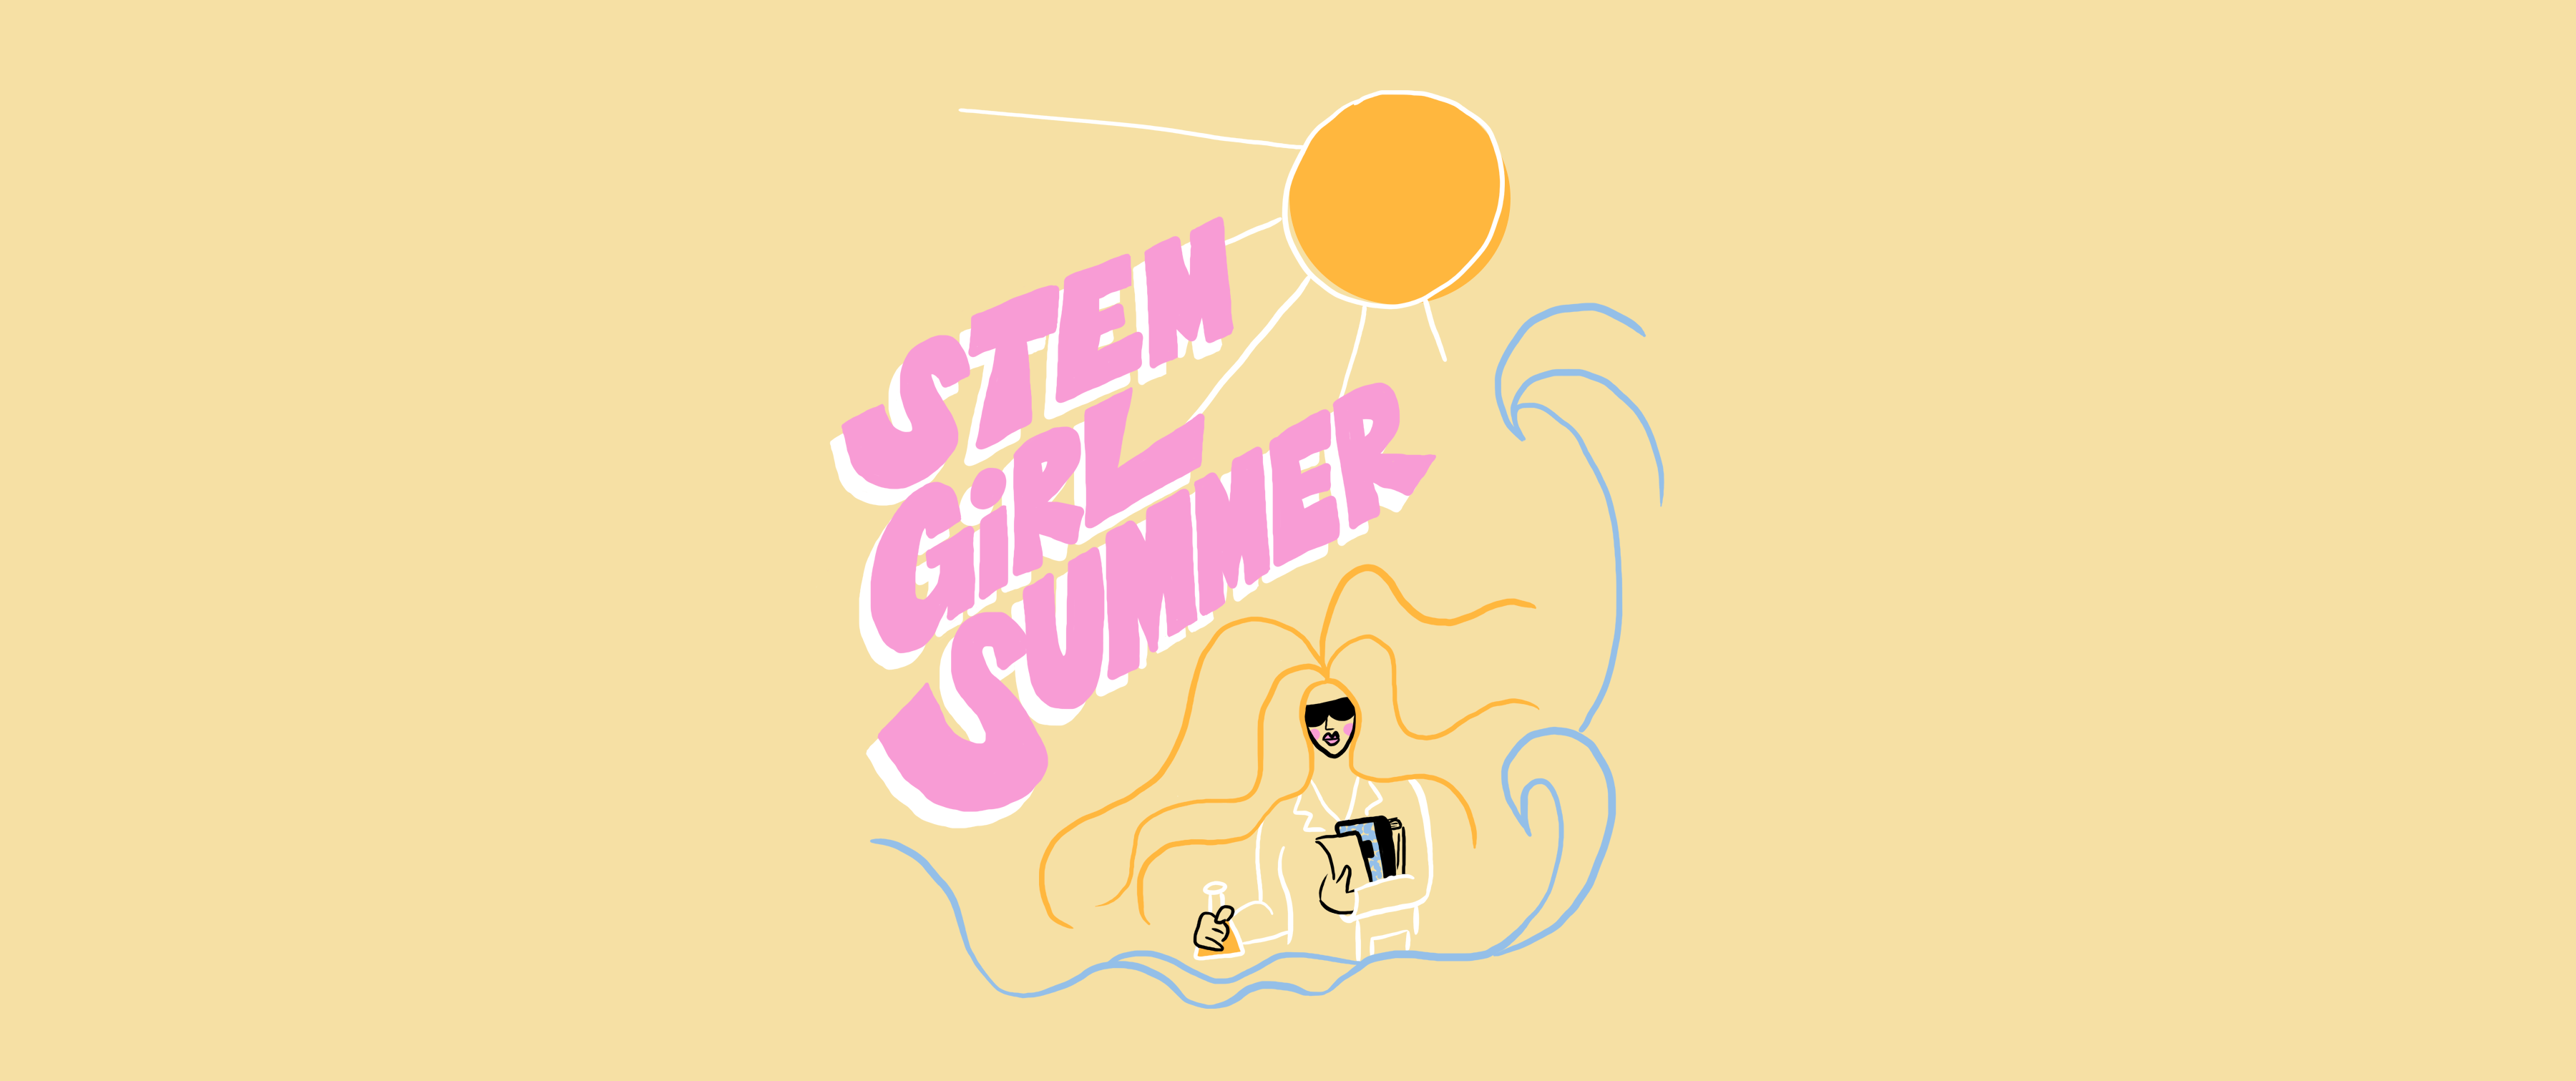 This image contains a yellow background with a female scientist under the sun with the pink text "STEM Girl Summer"